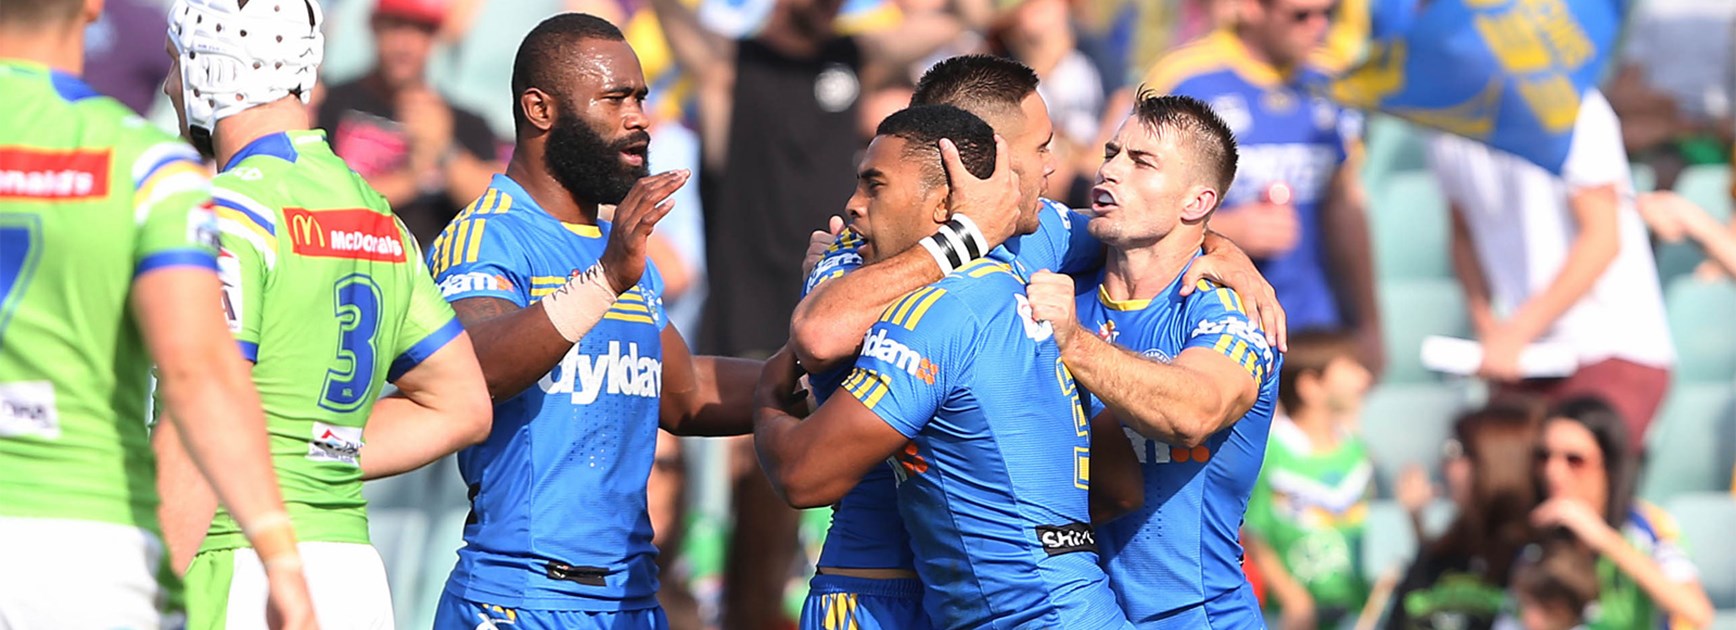 The Eels blew Canberra off the park in the first half on Saturday afternoon.